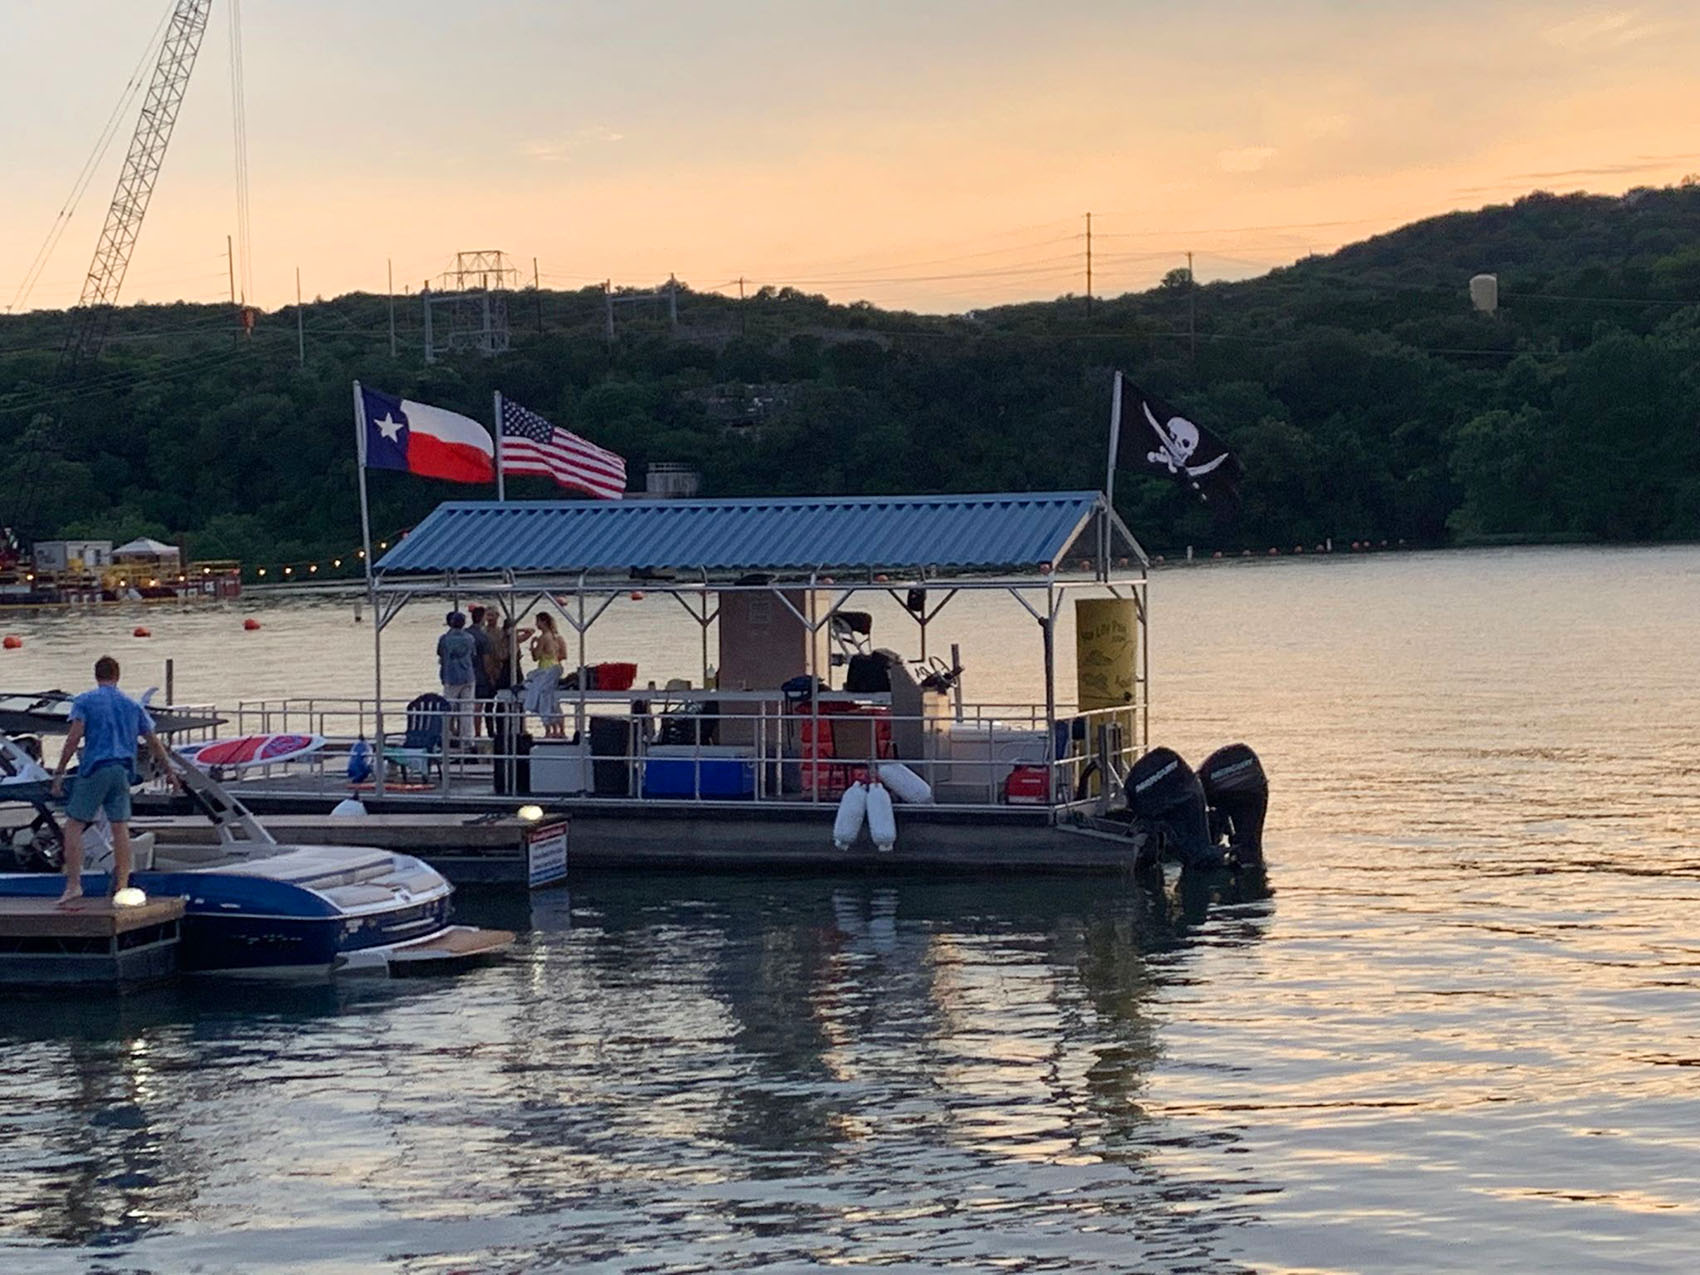 Lake Austin Parties' Myacht getting prepped for a festive Saturday on Lake Austin.